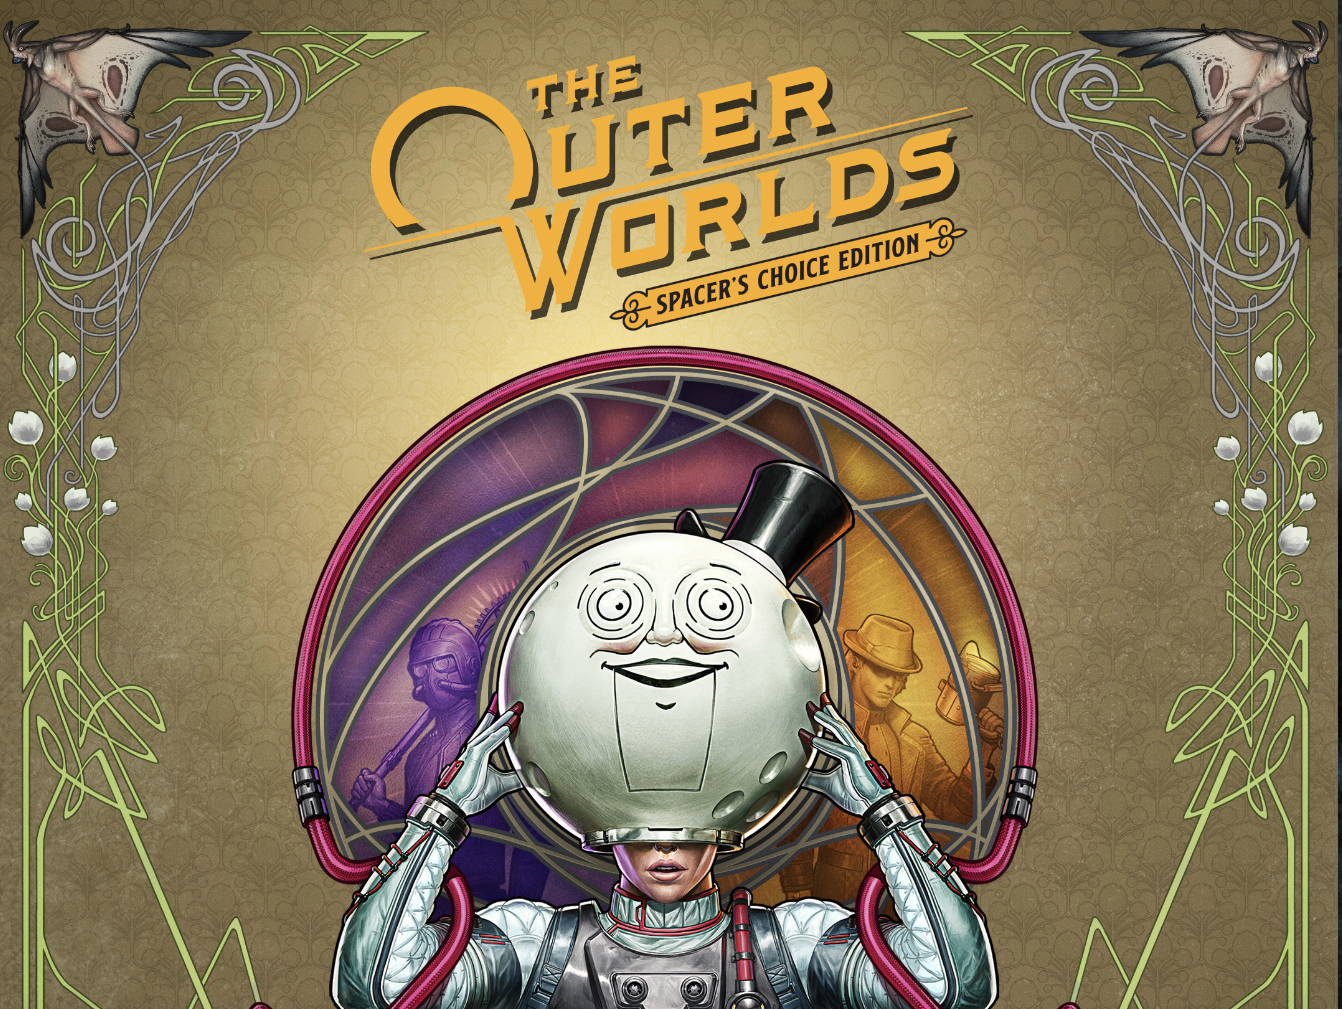 The Outer Worlds: Murder on Eridanos - Epic Games Store